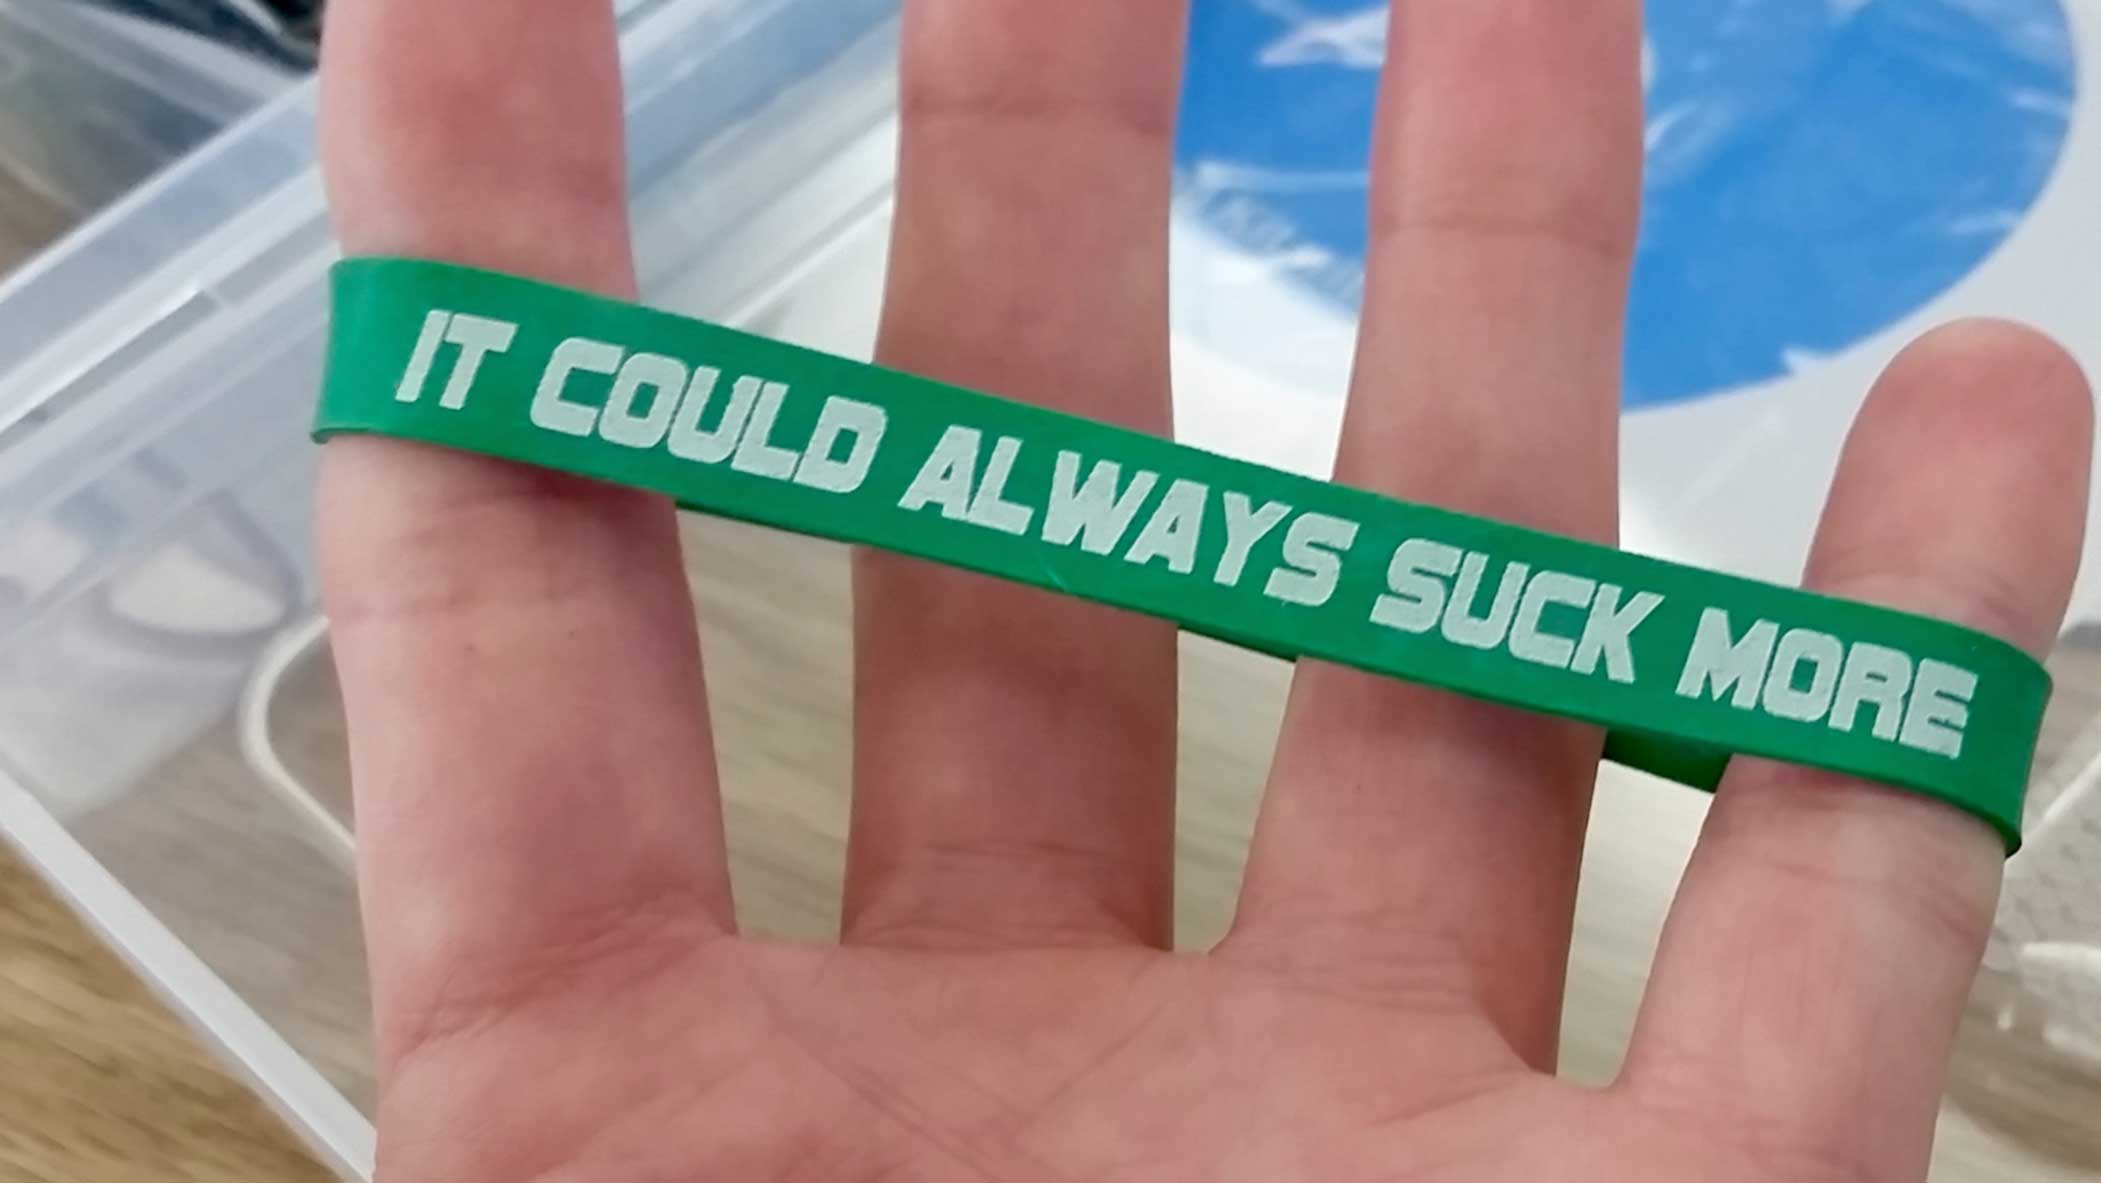 Bracelet says 'it could always suck more'